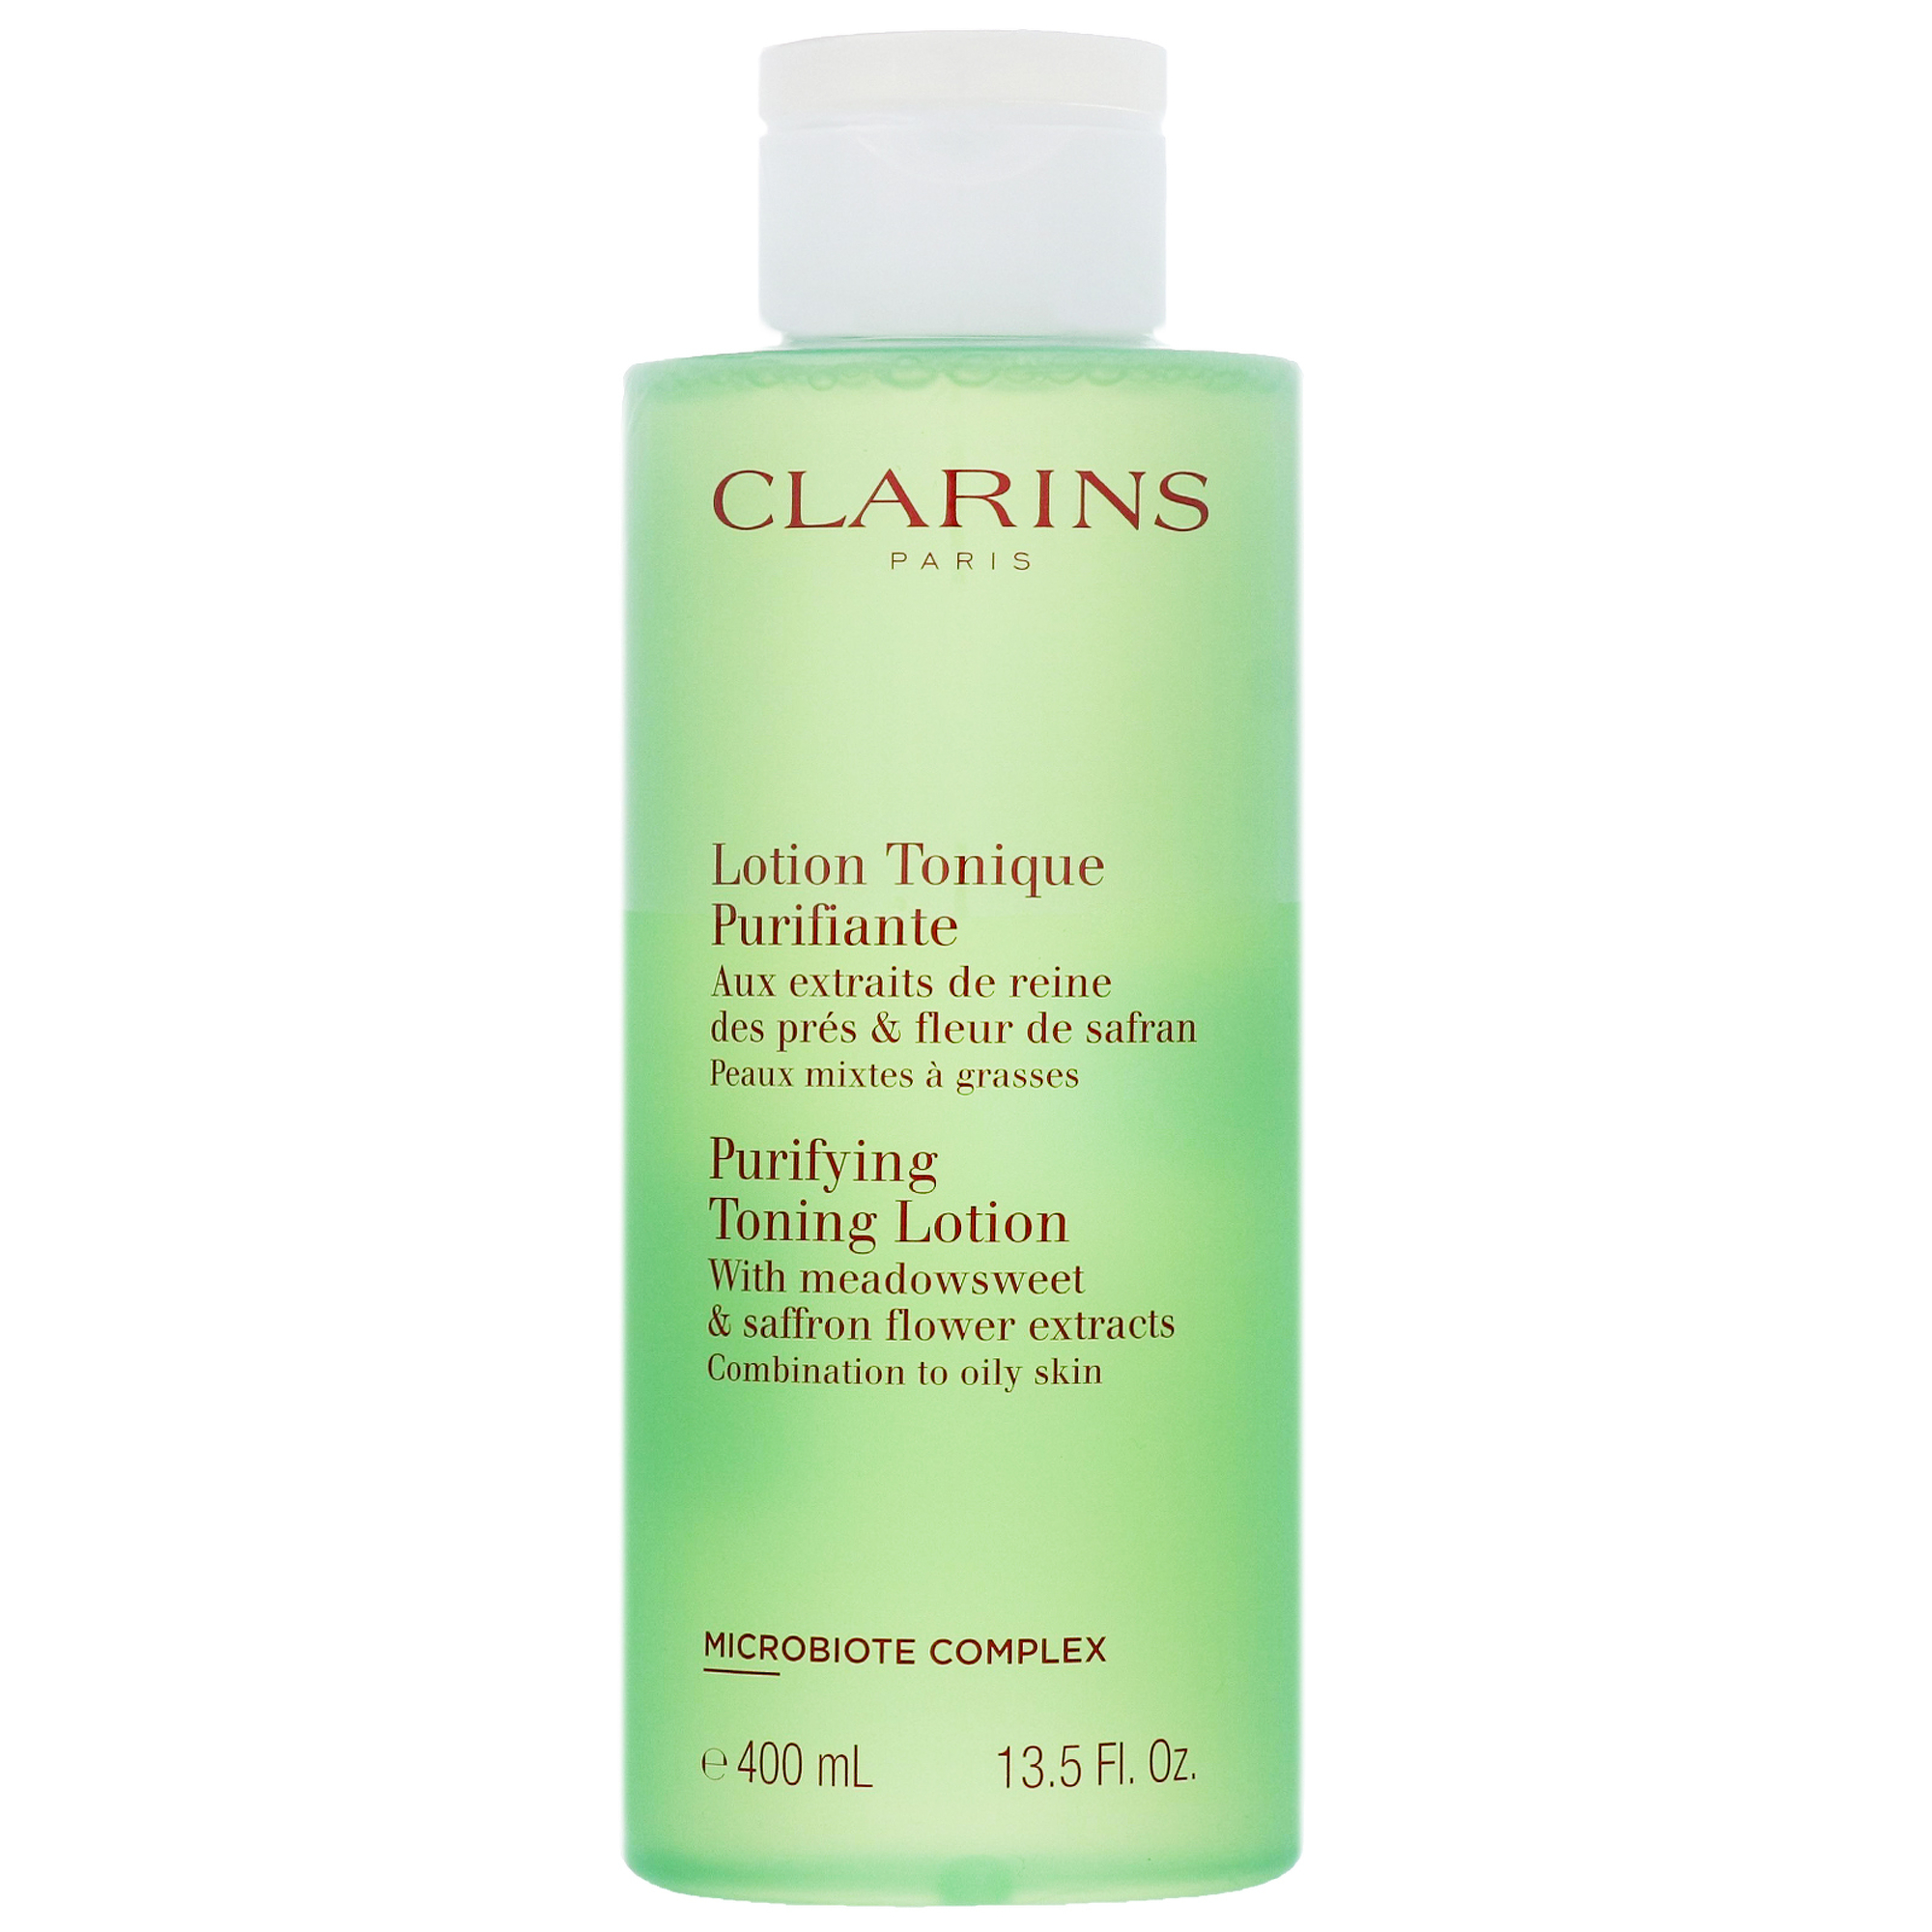 Photos - Facial / Body Cleansing Product Clarins Cleansers & Toners Purifying Toning Lotion 400ml 